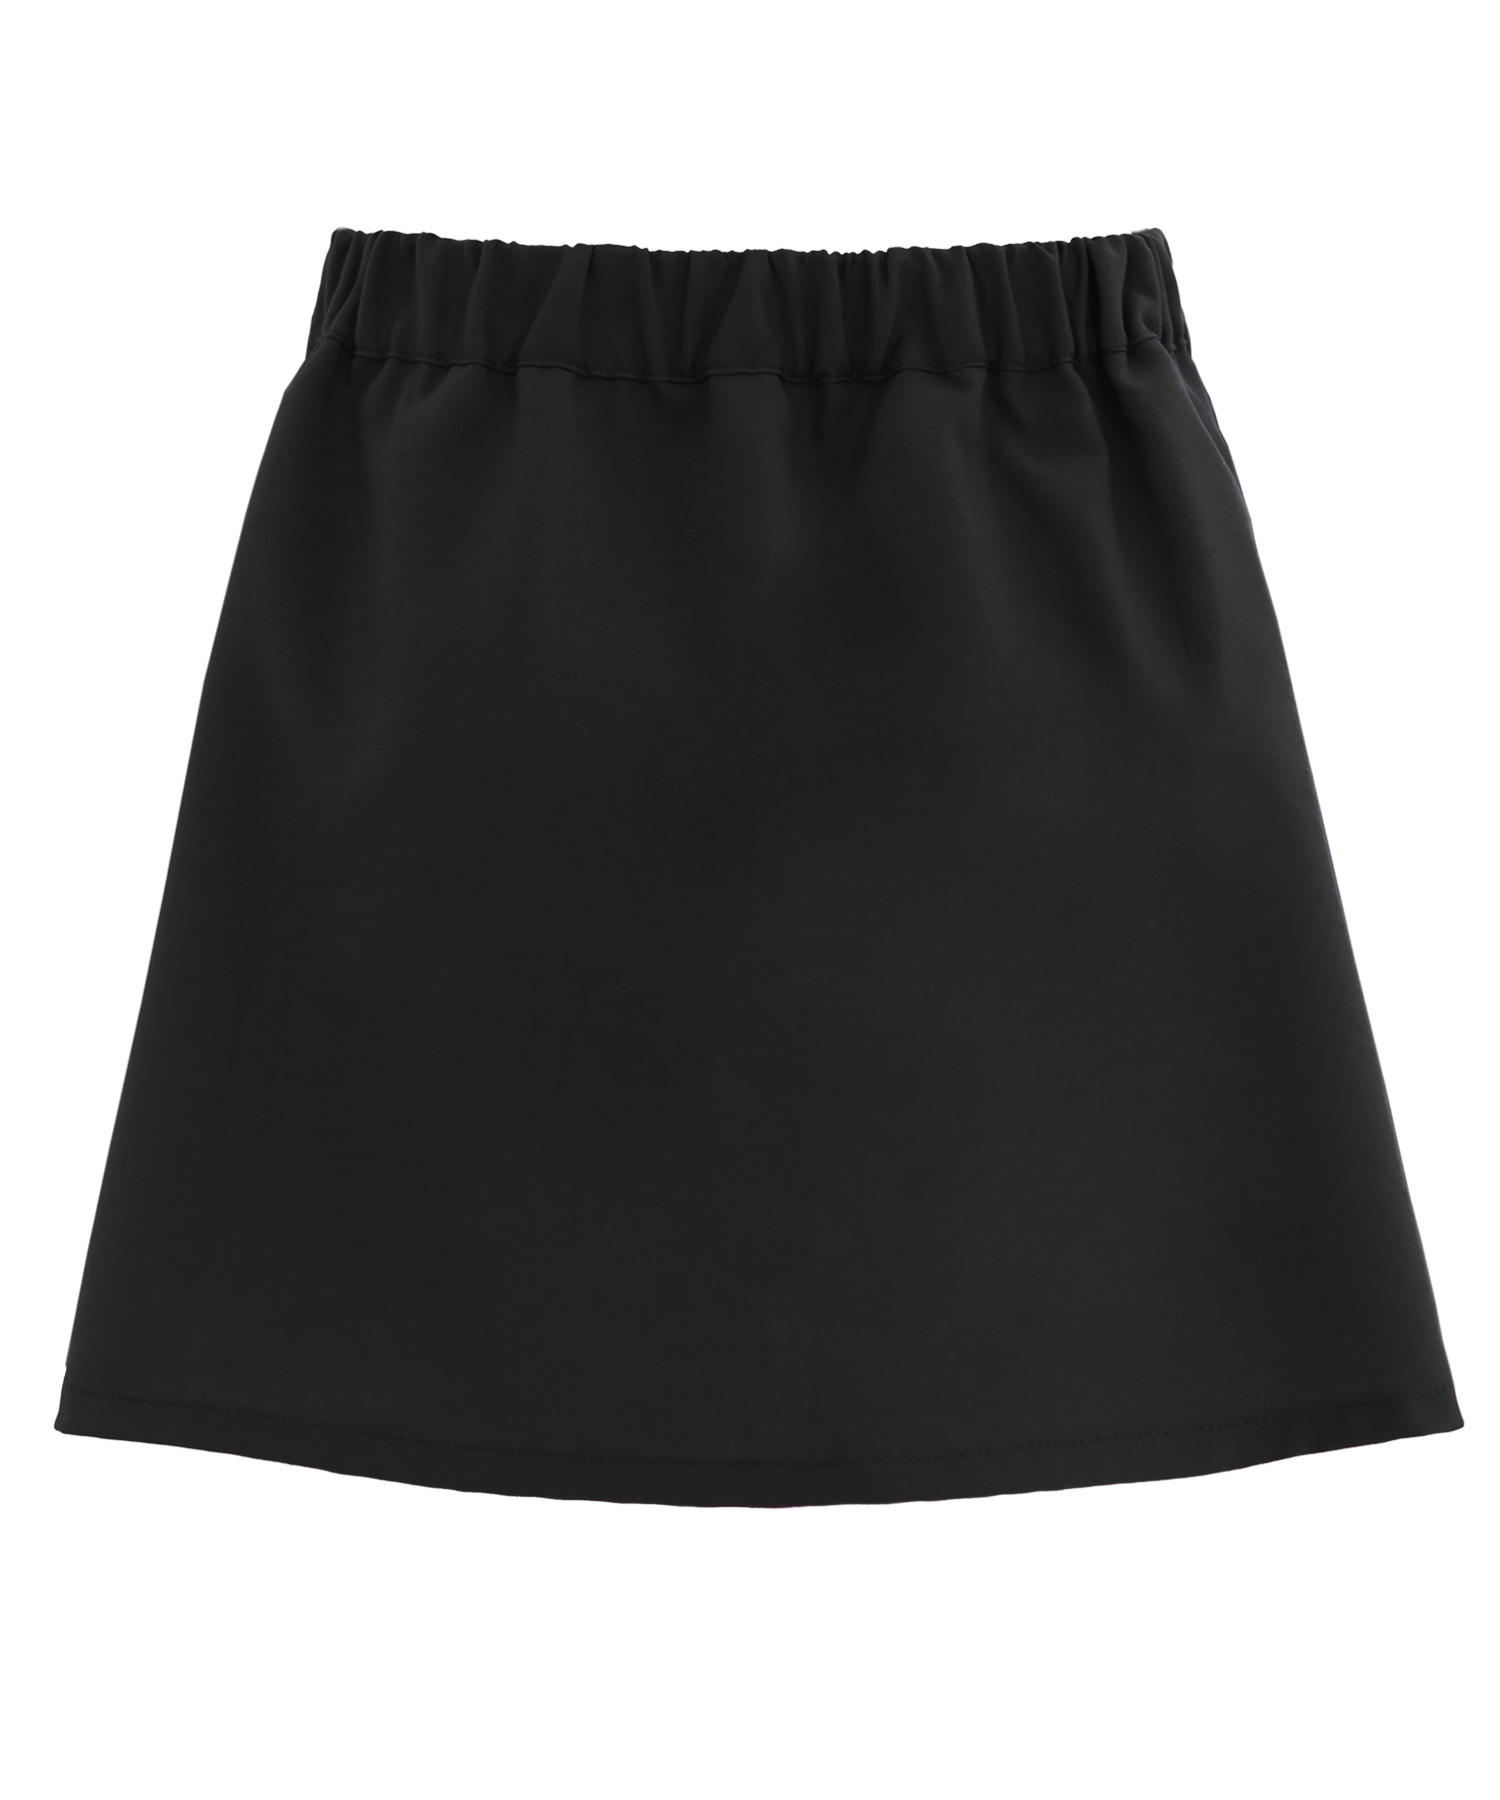 FAIRY SKIRT IN BLACK pre-order delivery May 30th